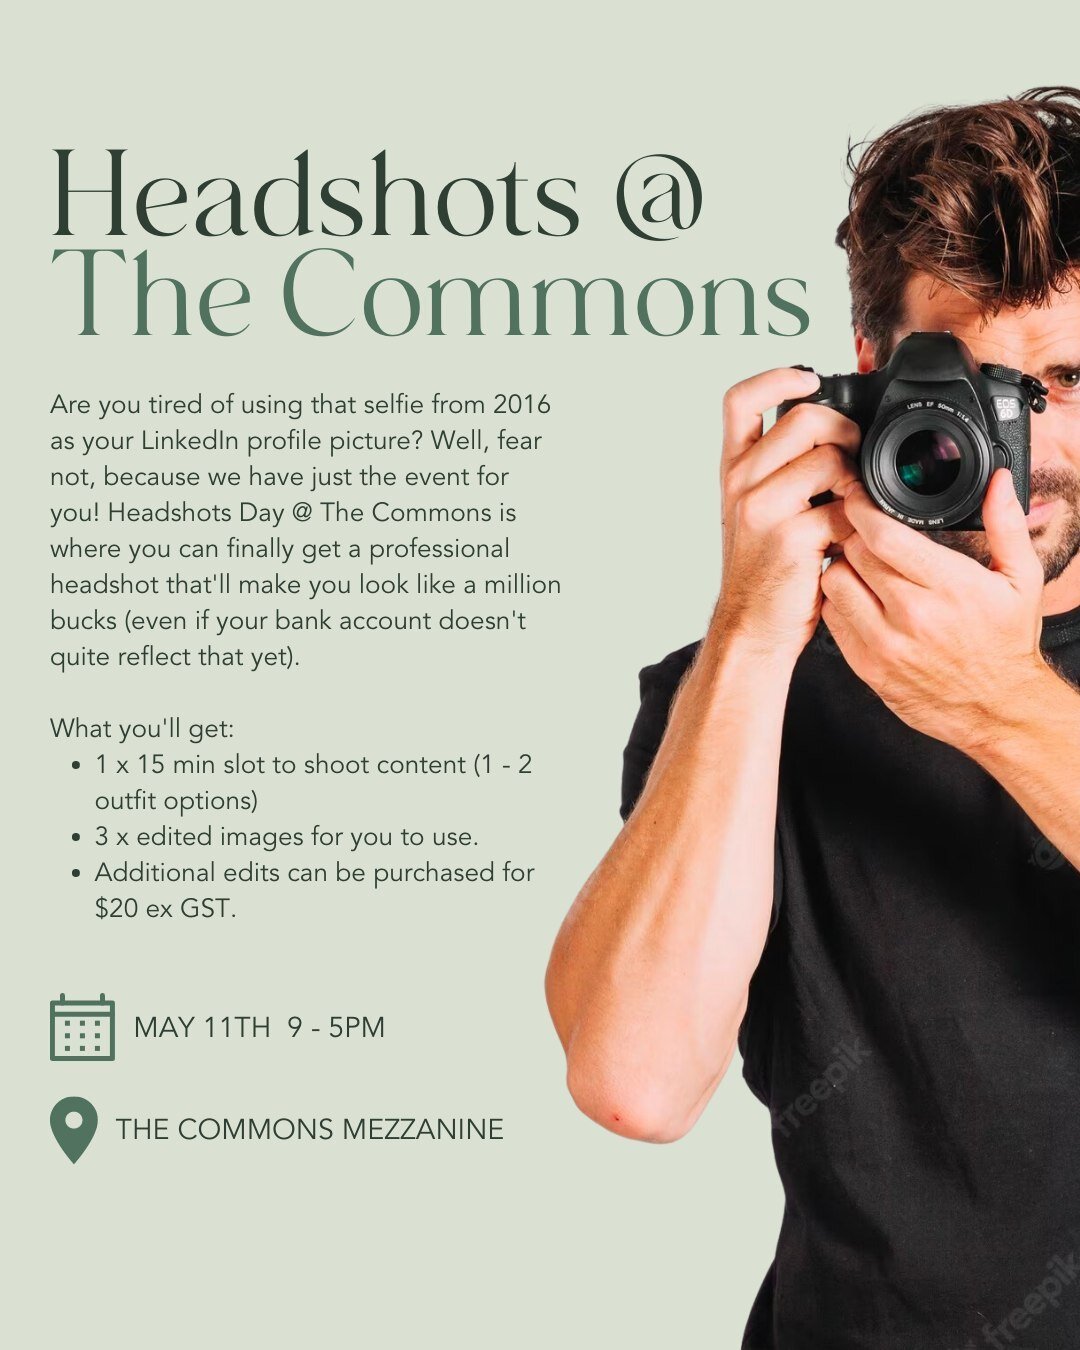 Tired of using outdated selfies for your LinkedIn profile? 😕🫣⁠
⁠
It's time to put your best face forward. Your personal brand deserves it. ⁠
⁠
Join us for our Headshots Day and get a professional headshot that'll make you look like a million bucks!